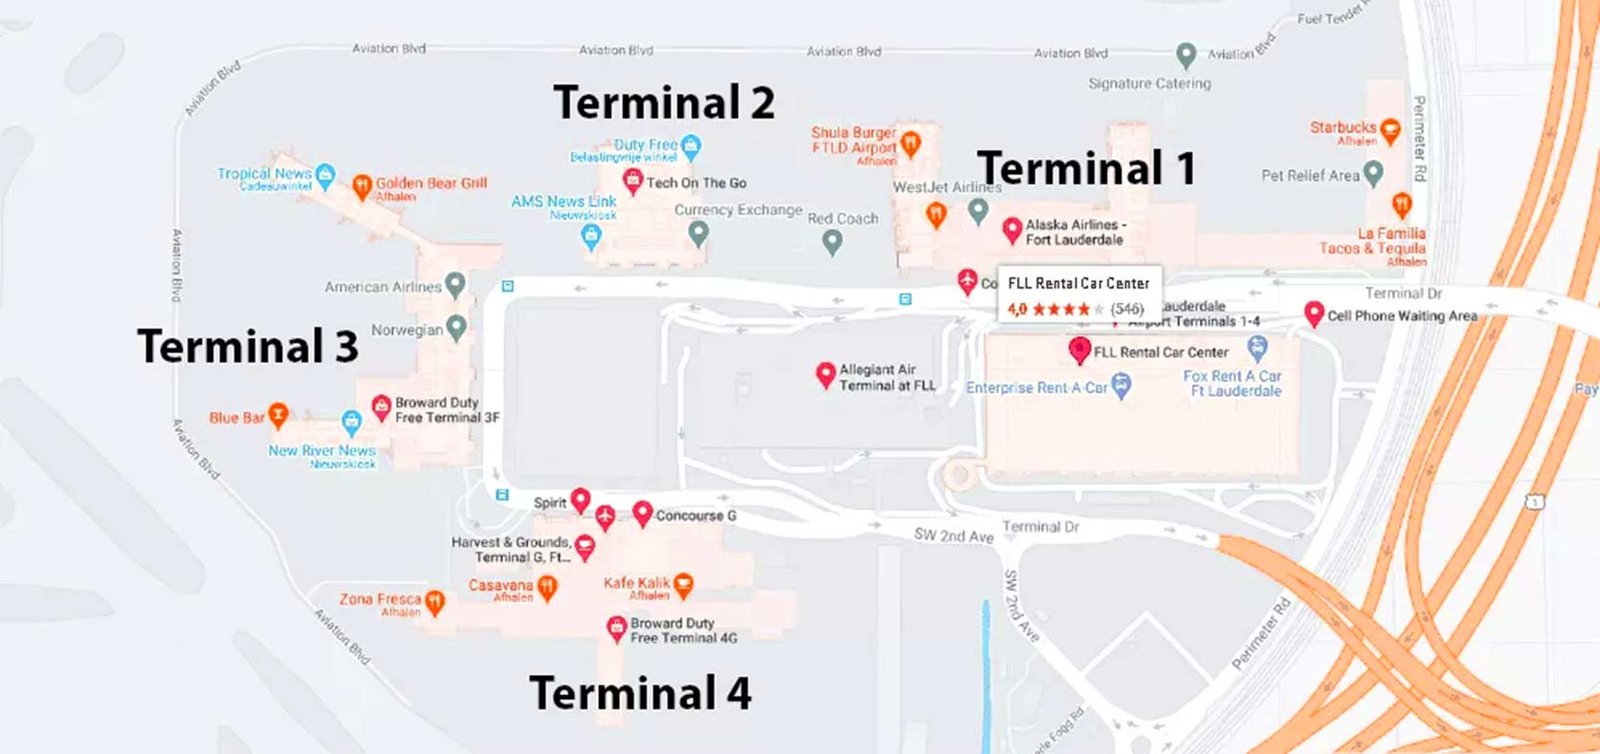 Fort Lauderdale Hollywood International Airport Fll Guide